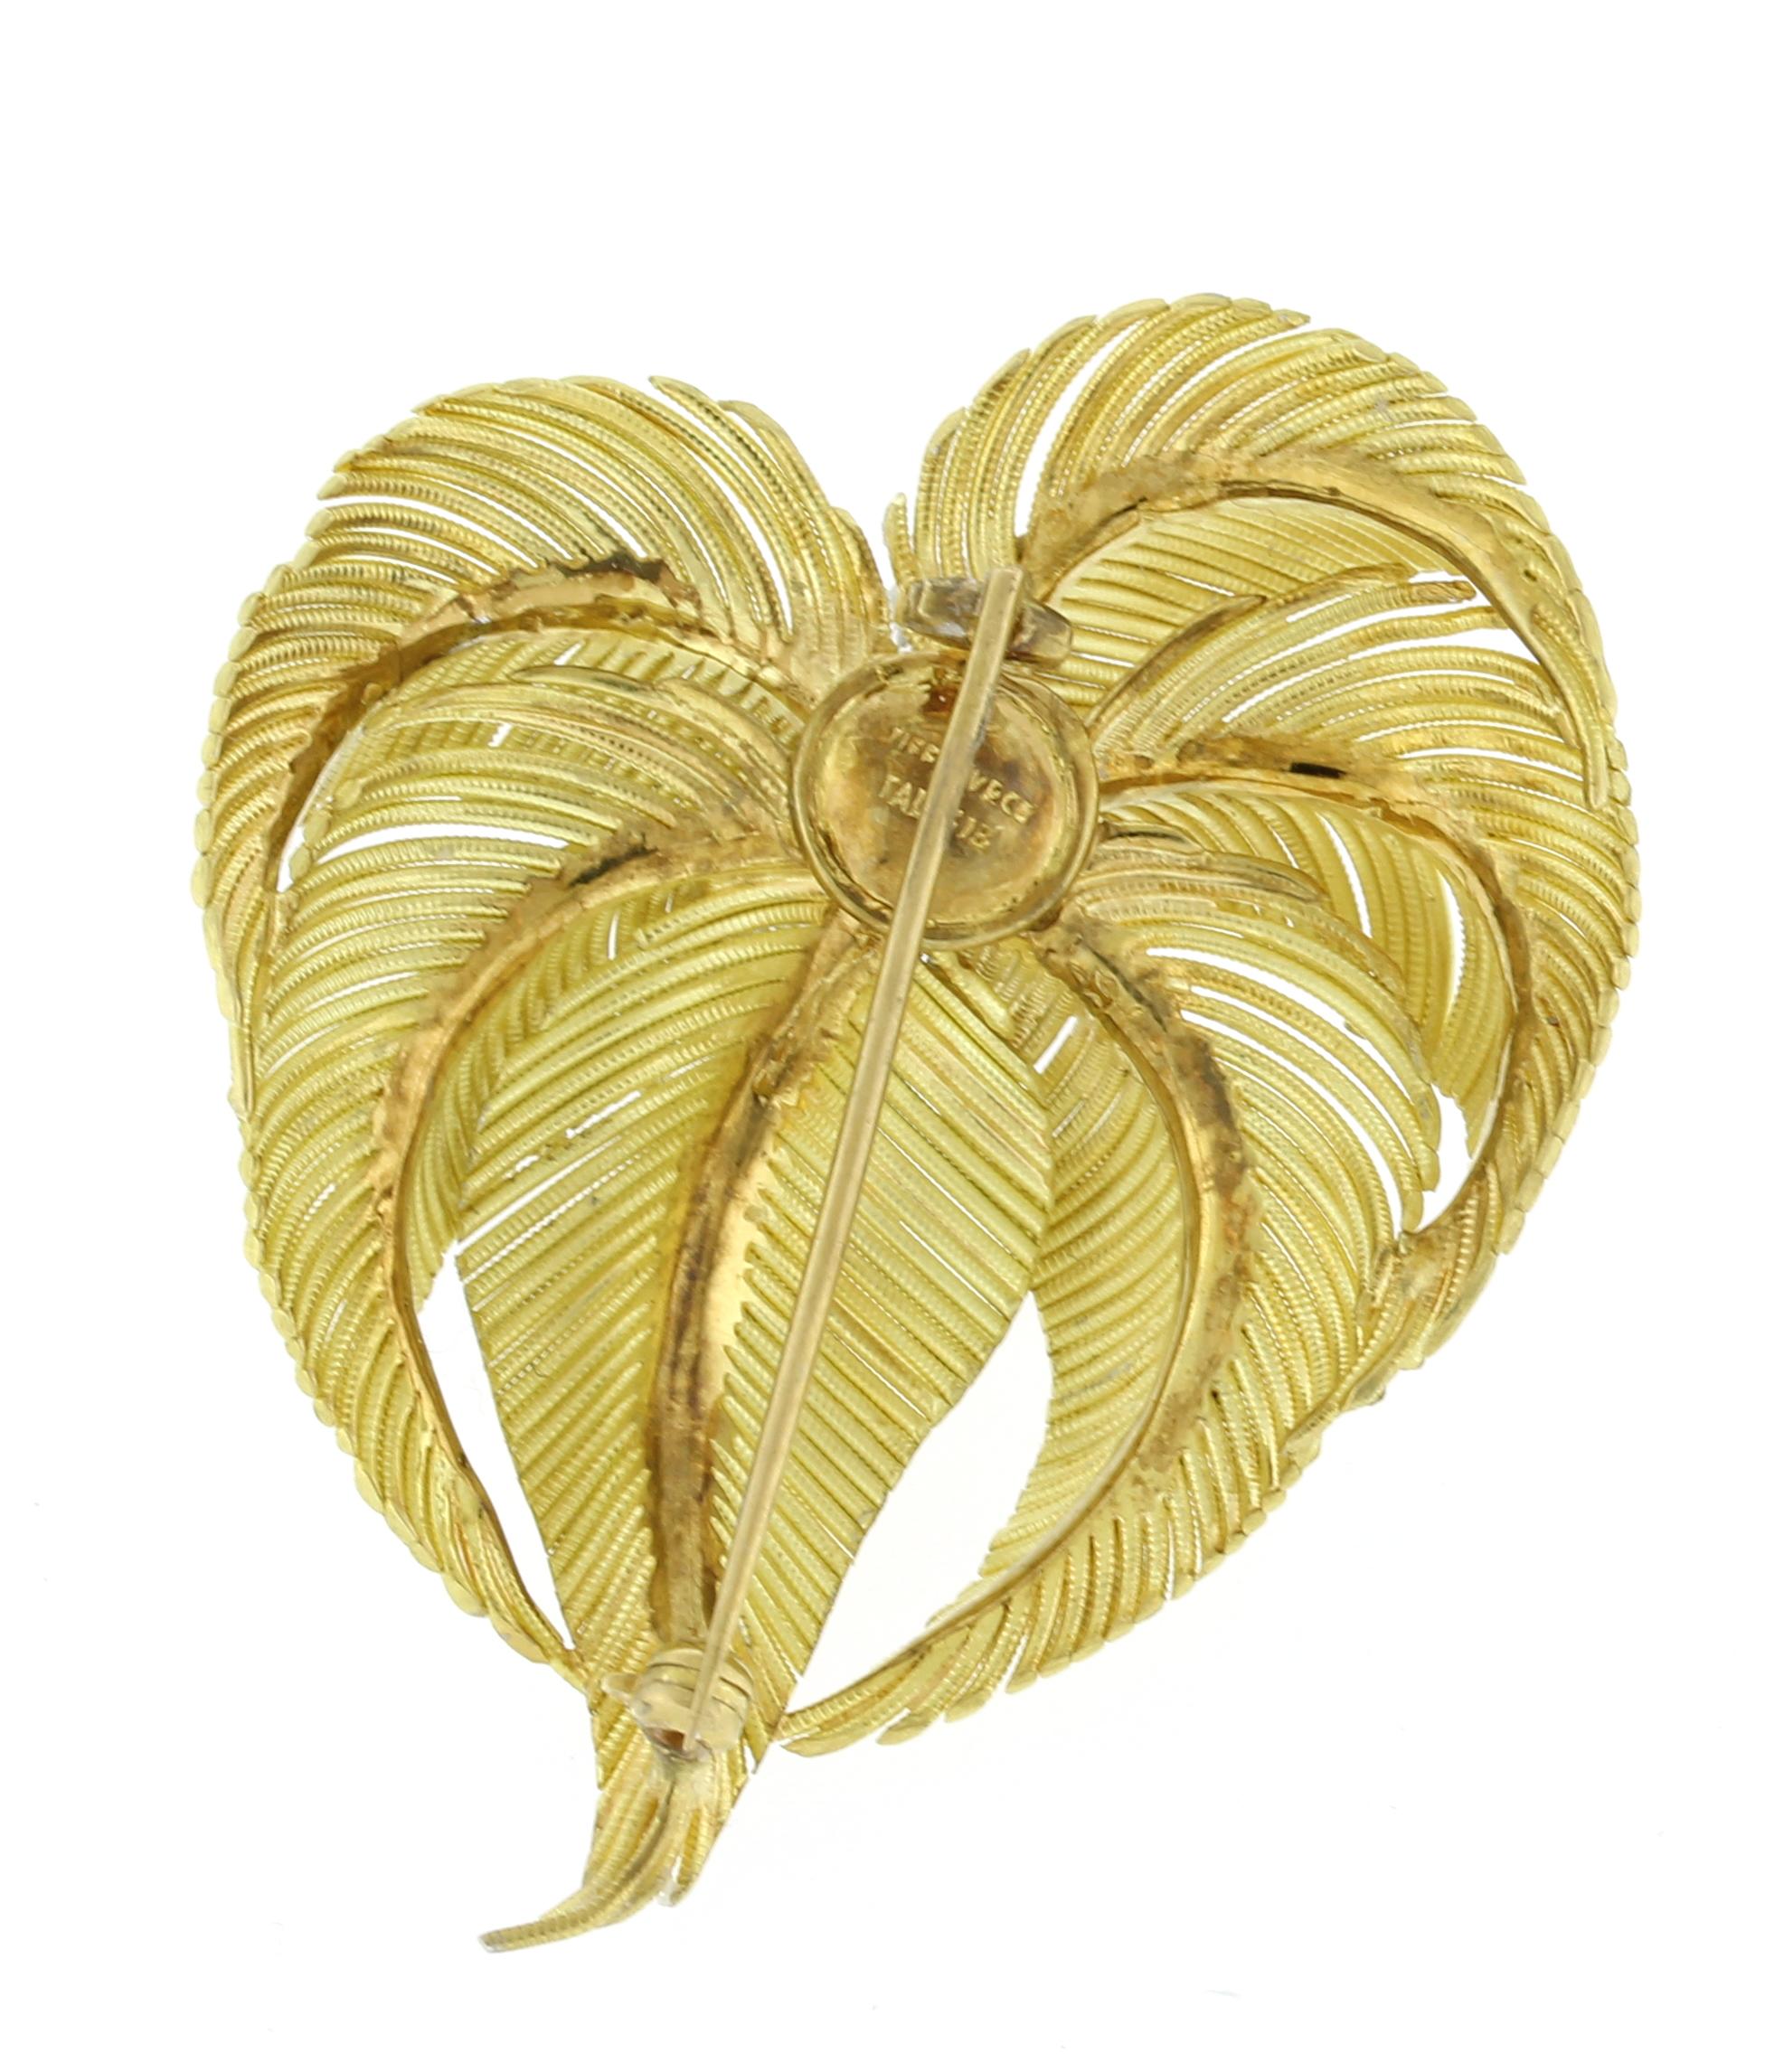 From Tiffany & Co., this palm brooch was made in Italy.
♦ Designer: Tiffany & Co
♦ Metal: 18kt yellow gold and platinum
♦ Dimensions: 2 1/4 by 1 3/4 inches
♦ Gemstone: 9Diamond = Approx .45cts
♦ Packaging: Tiffany Box
♦ Condition: Excellent,